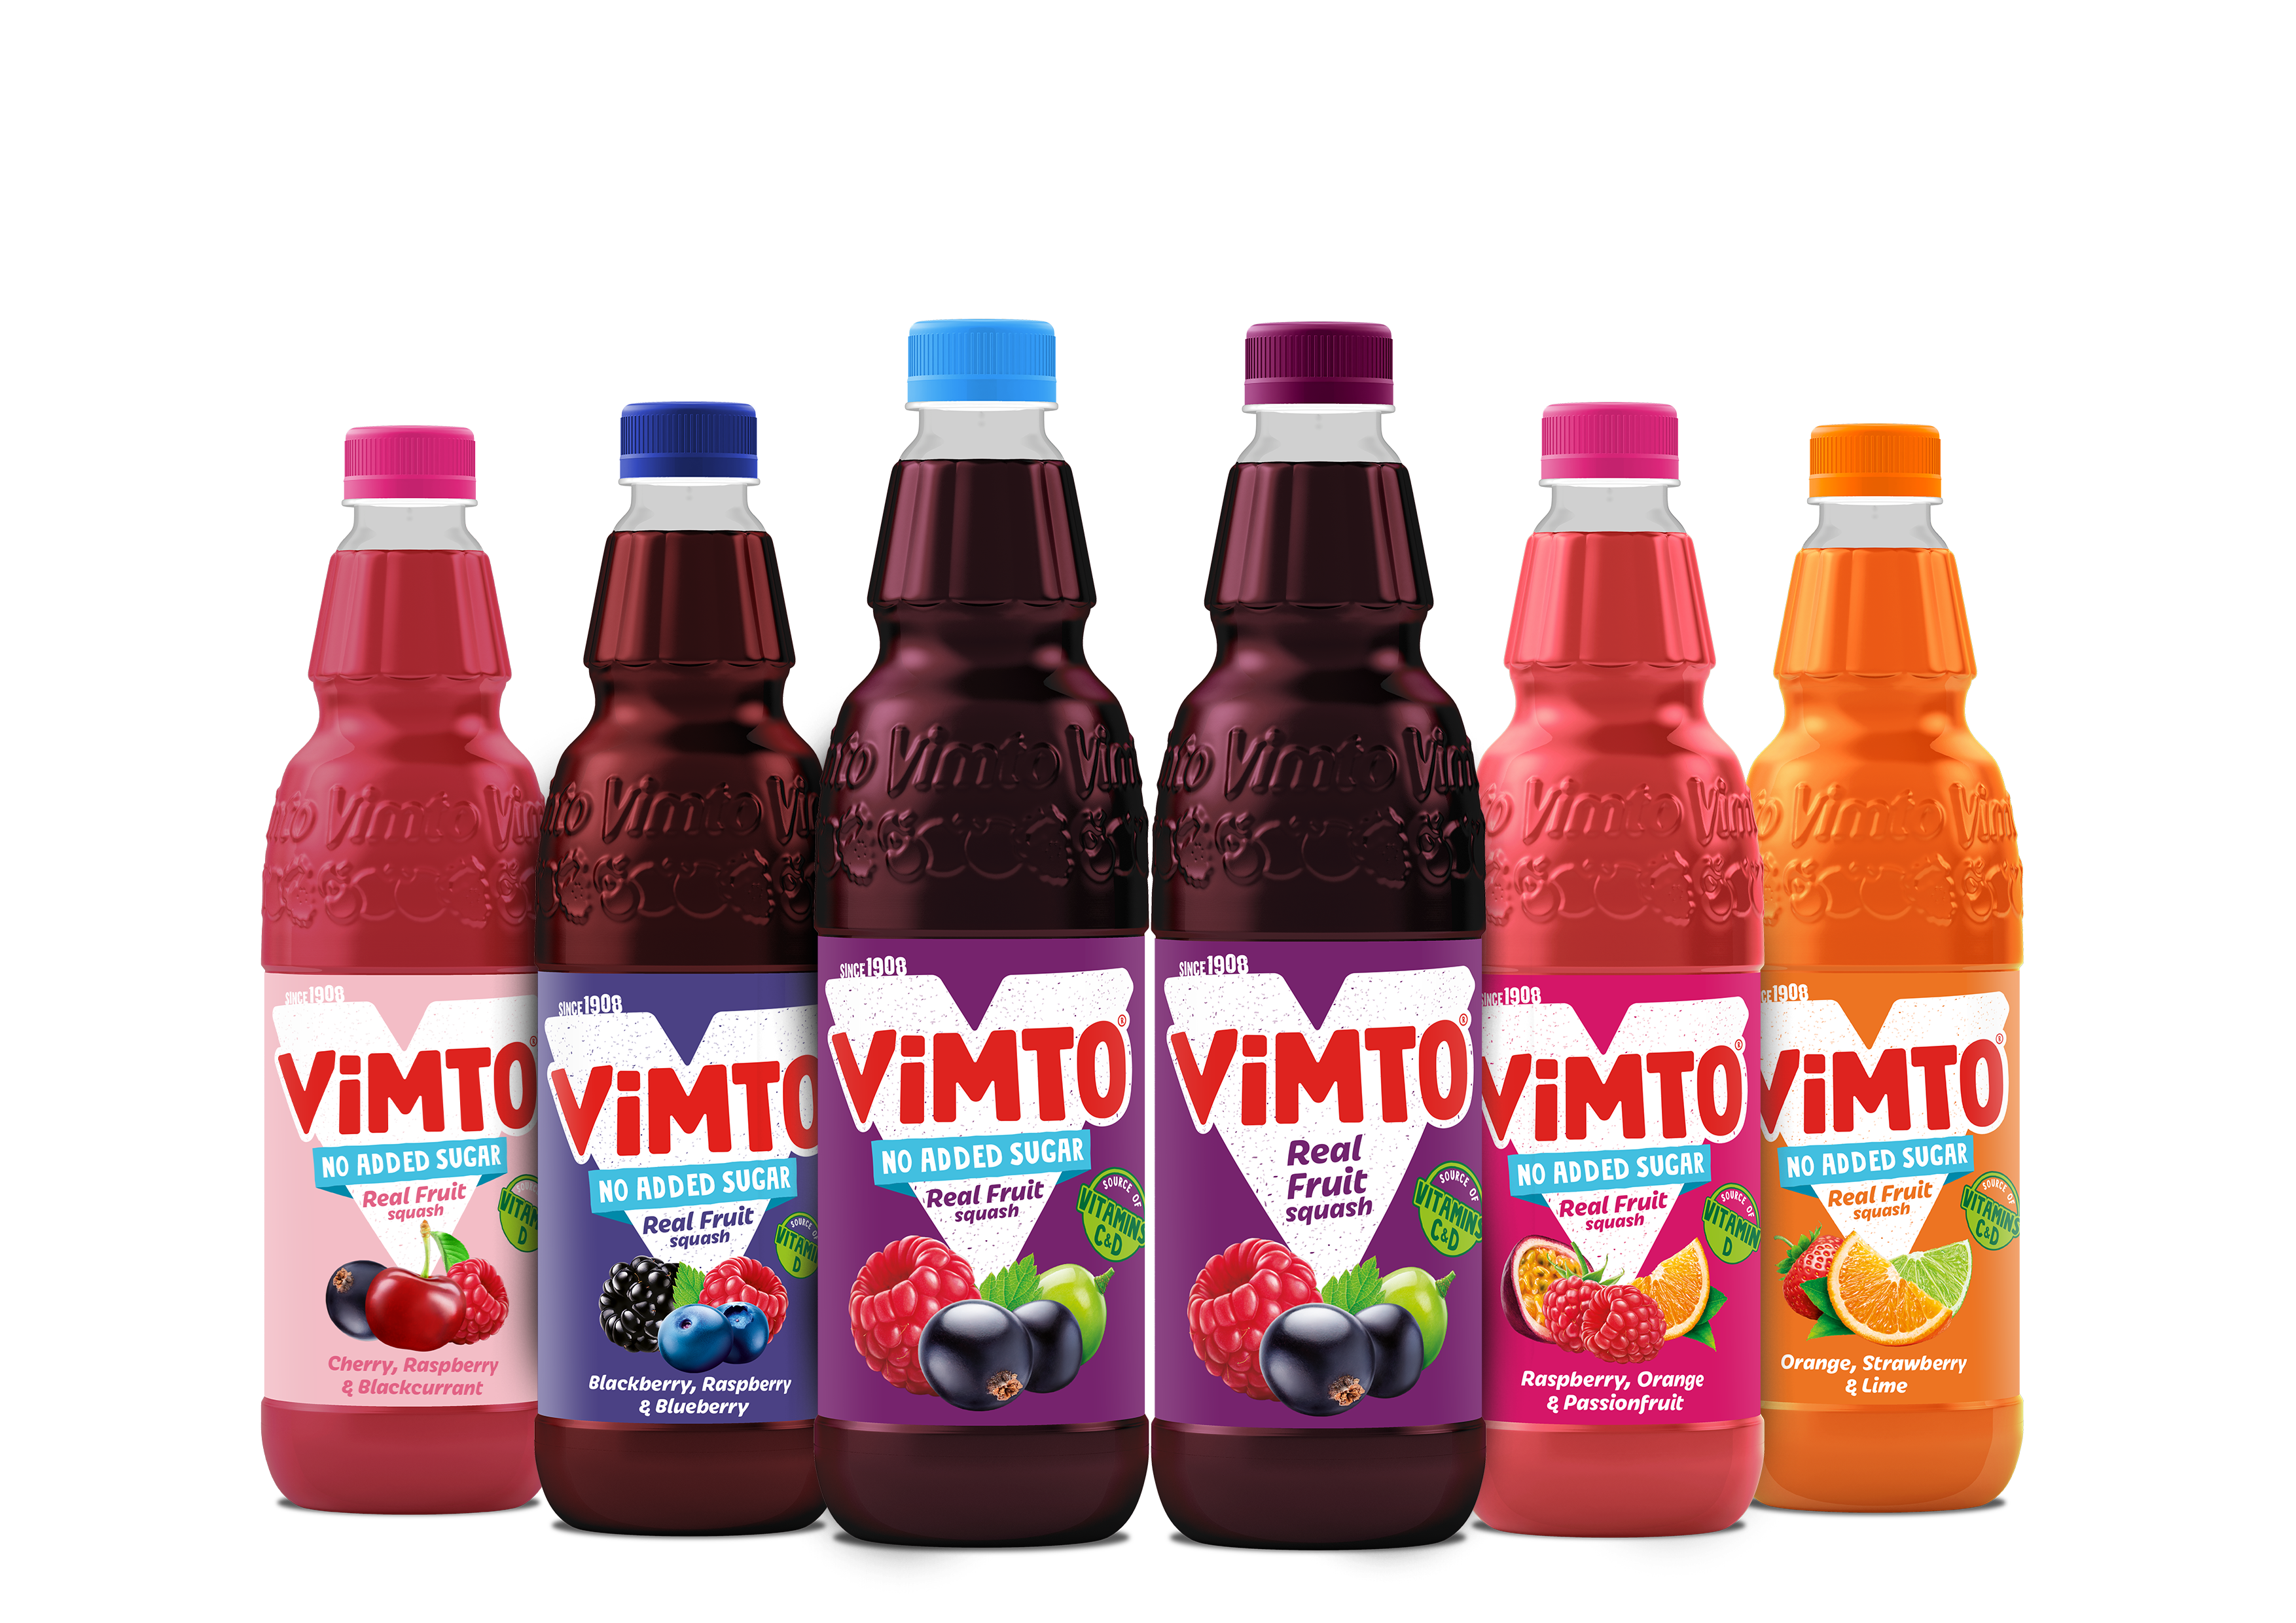 Vimto relaunches with emphasis on health and new flavour